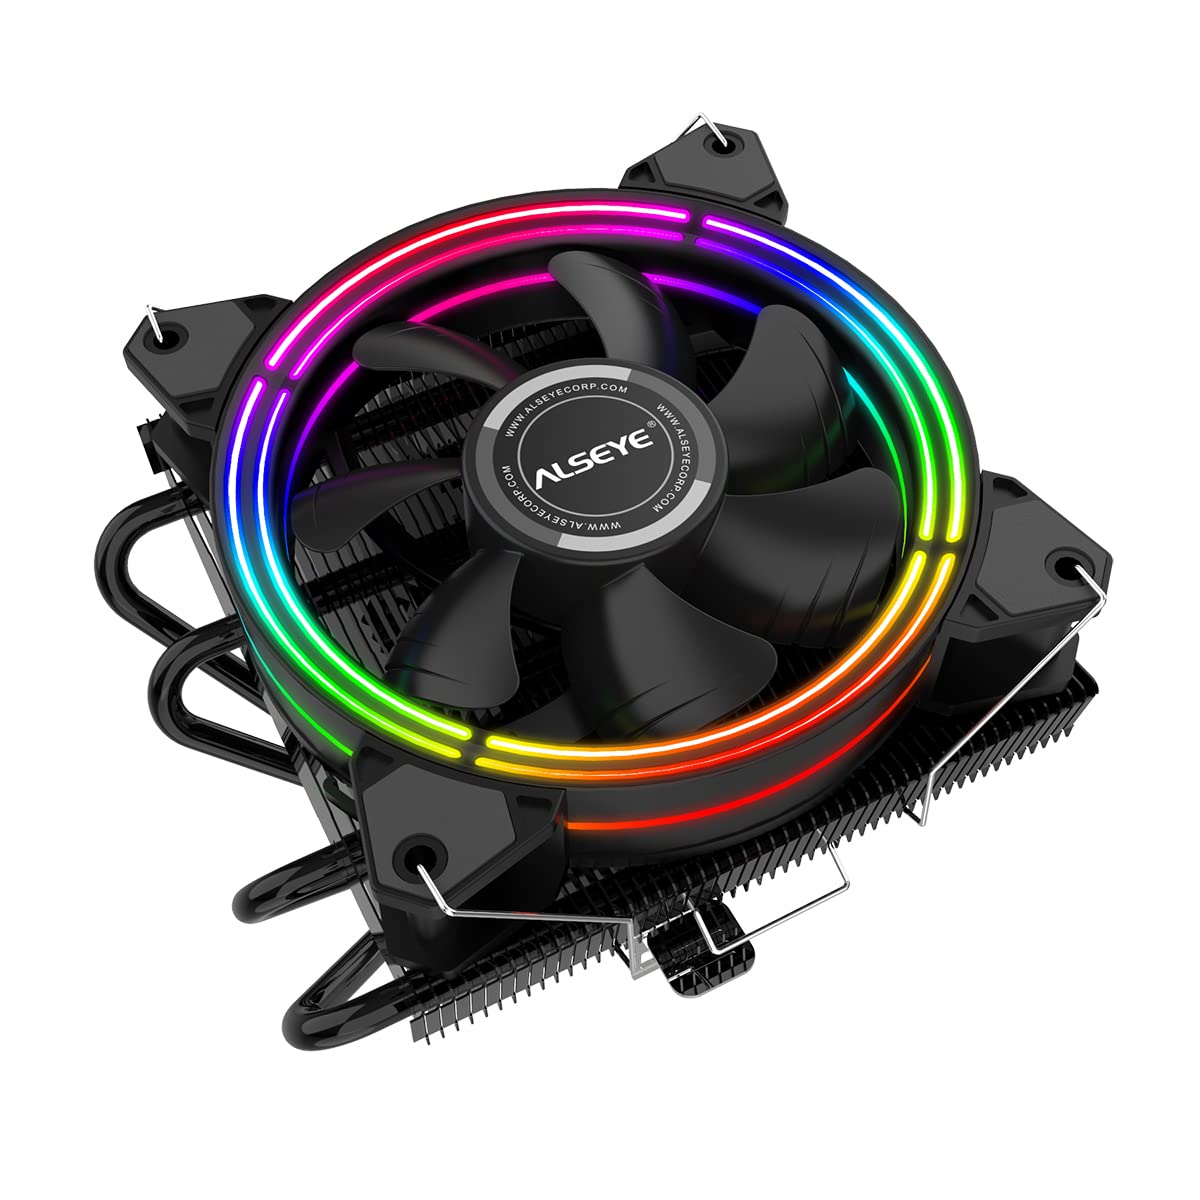 ALSEYE H120T PWM Halo Series Universal RGB CPU Cooler with 4 Heat Pipes and 120MM Fan 140W-CPU Air Cooler-dealsplant